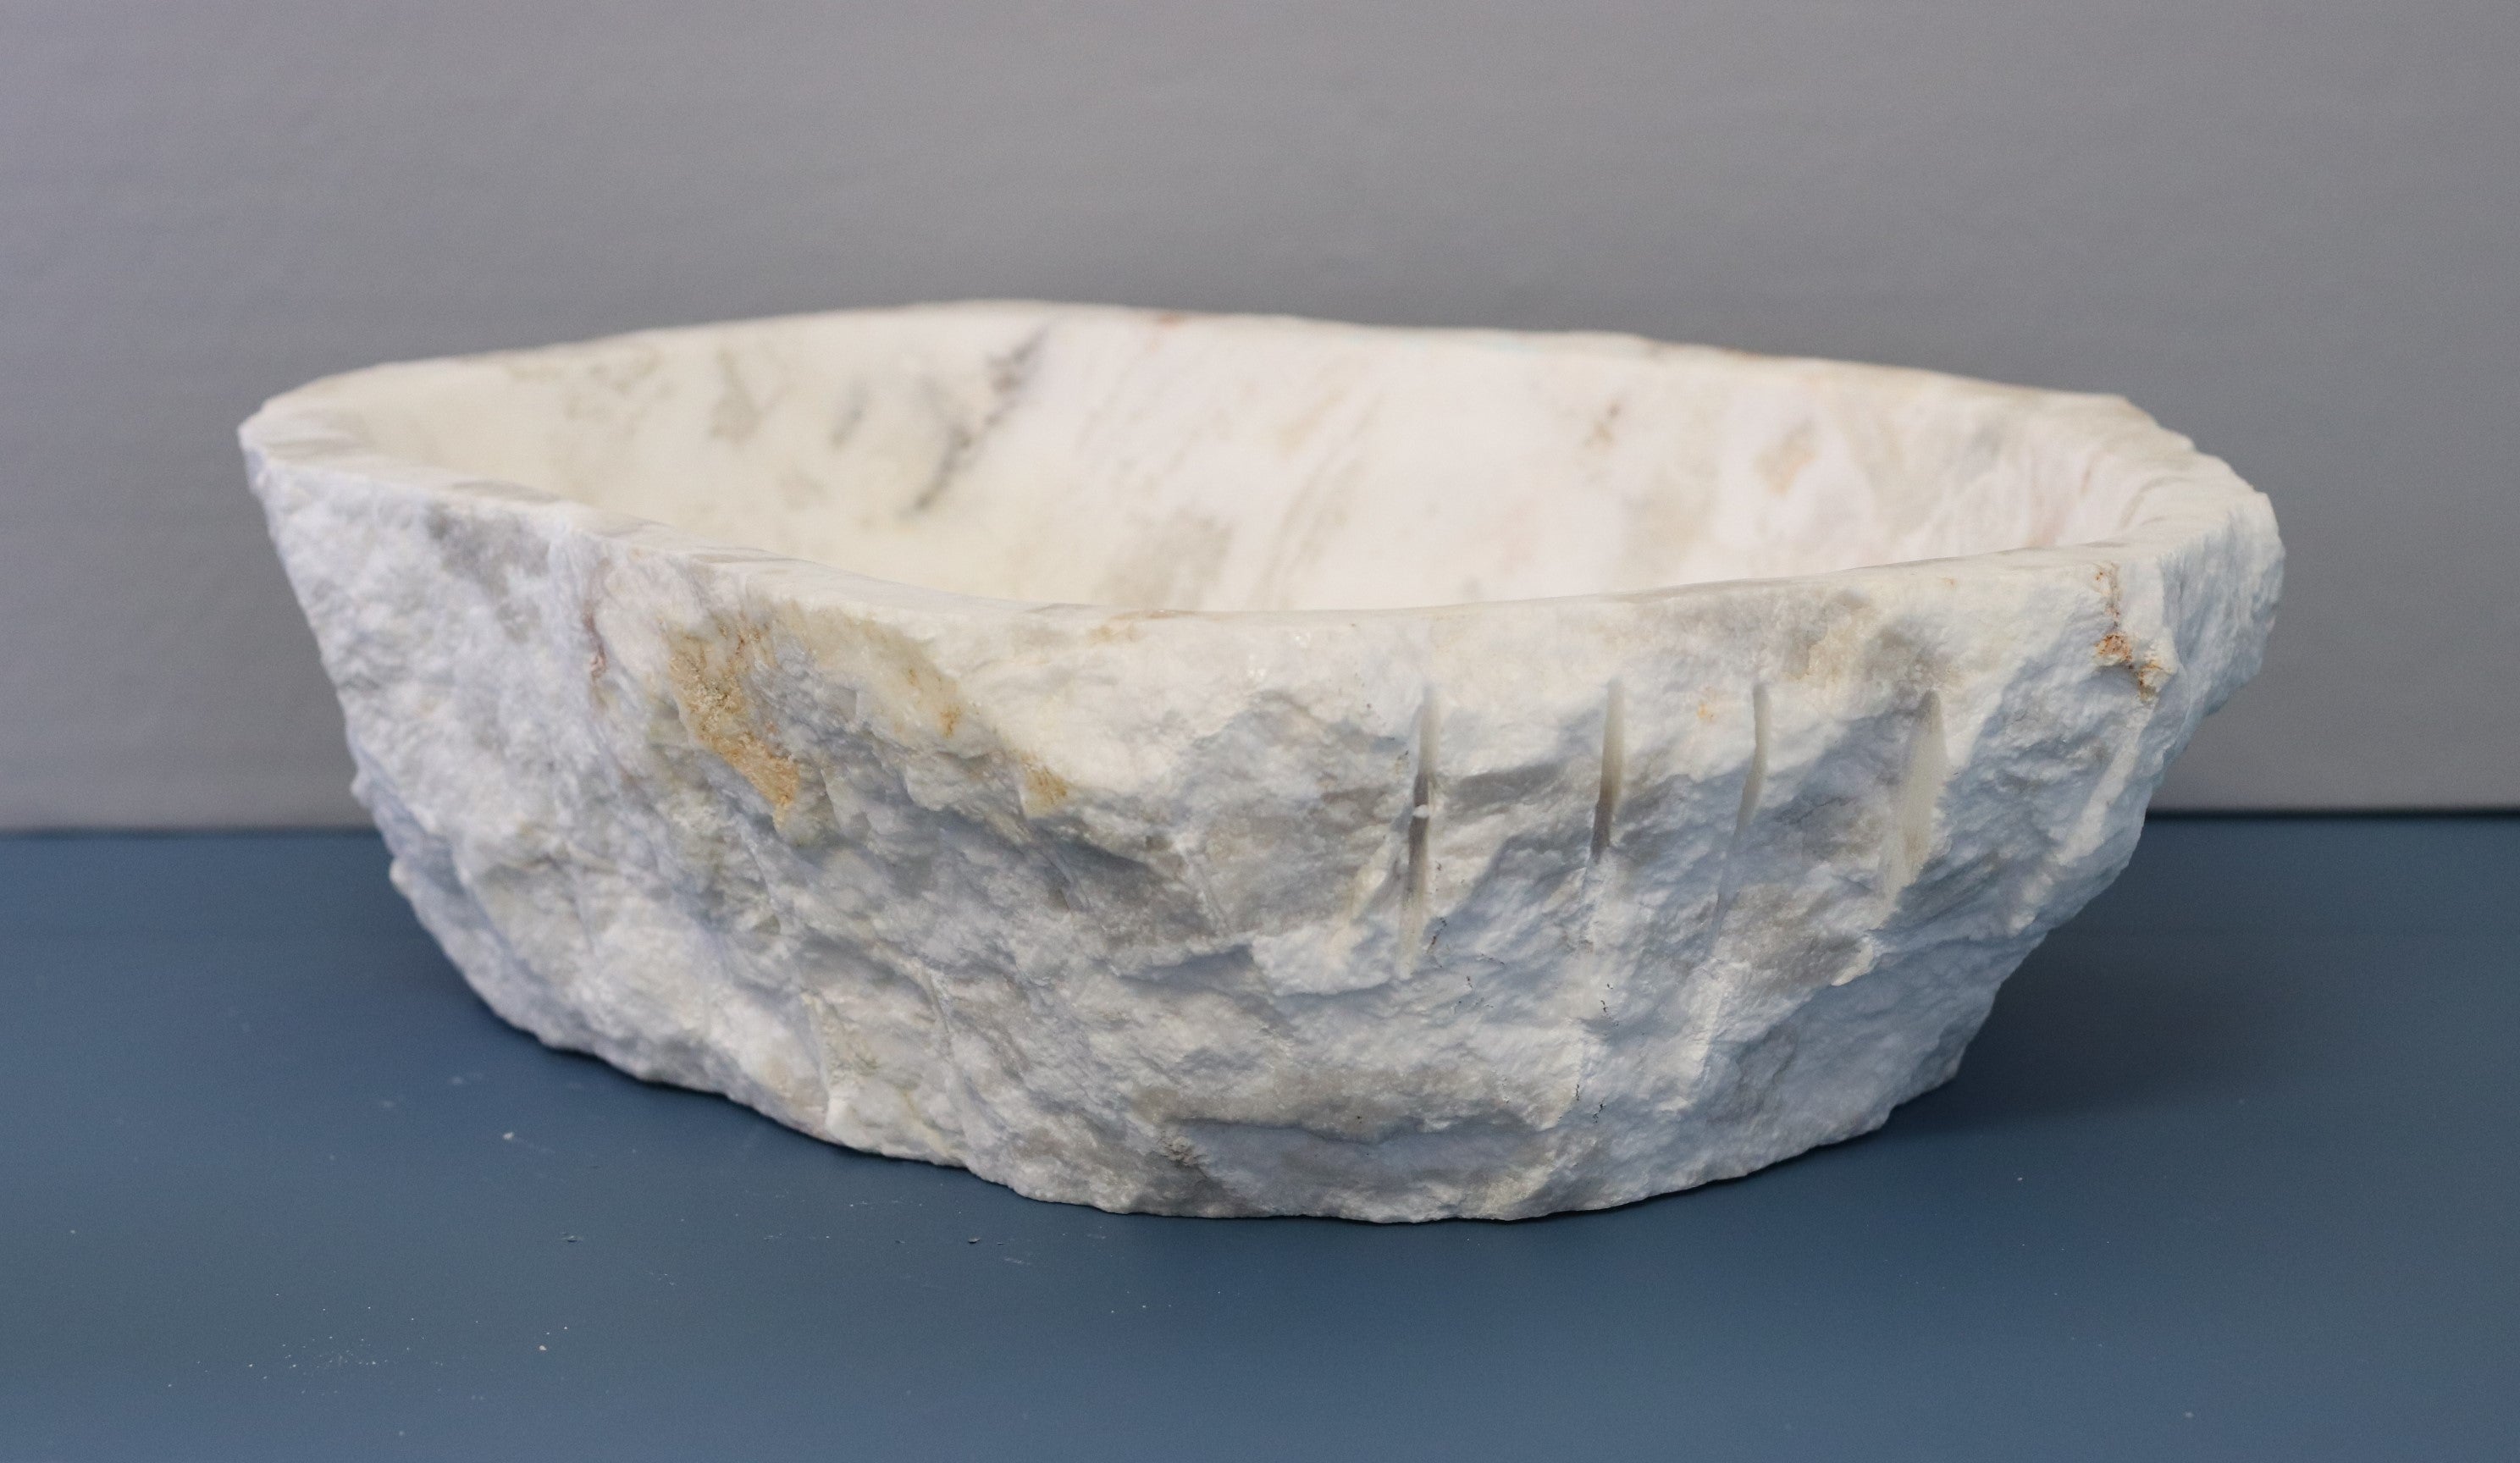 White Grey Onyx Stone  Bathroom Vessel Sink. Epoxy Sealant is available with fast shipping. Standard drain size. A beautiful work of rustic art. Handmade. Buy Now at www.felipeandgrace.com.